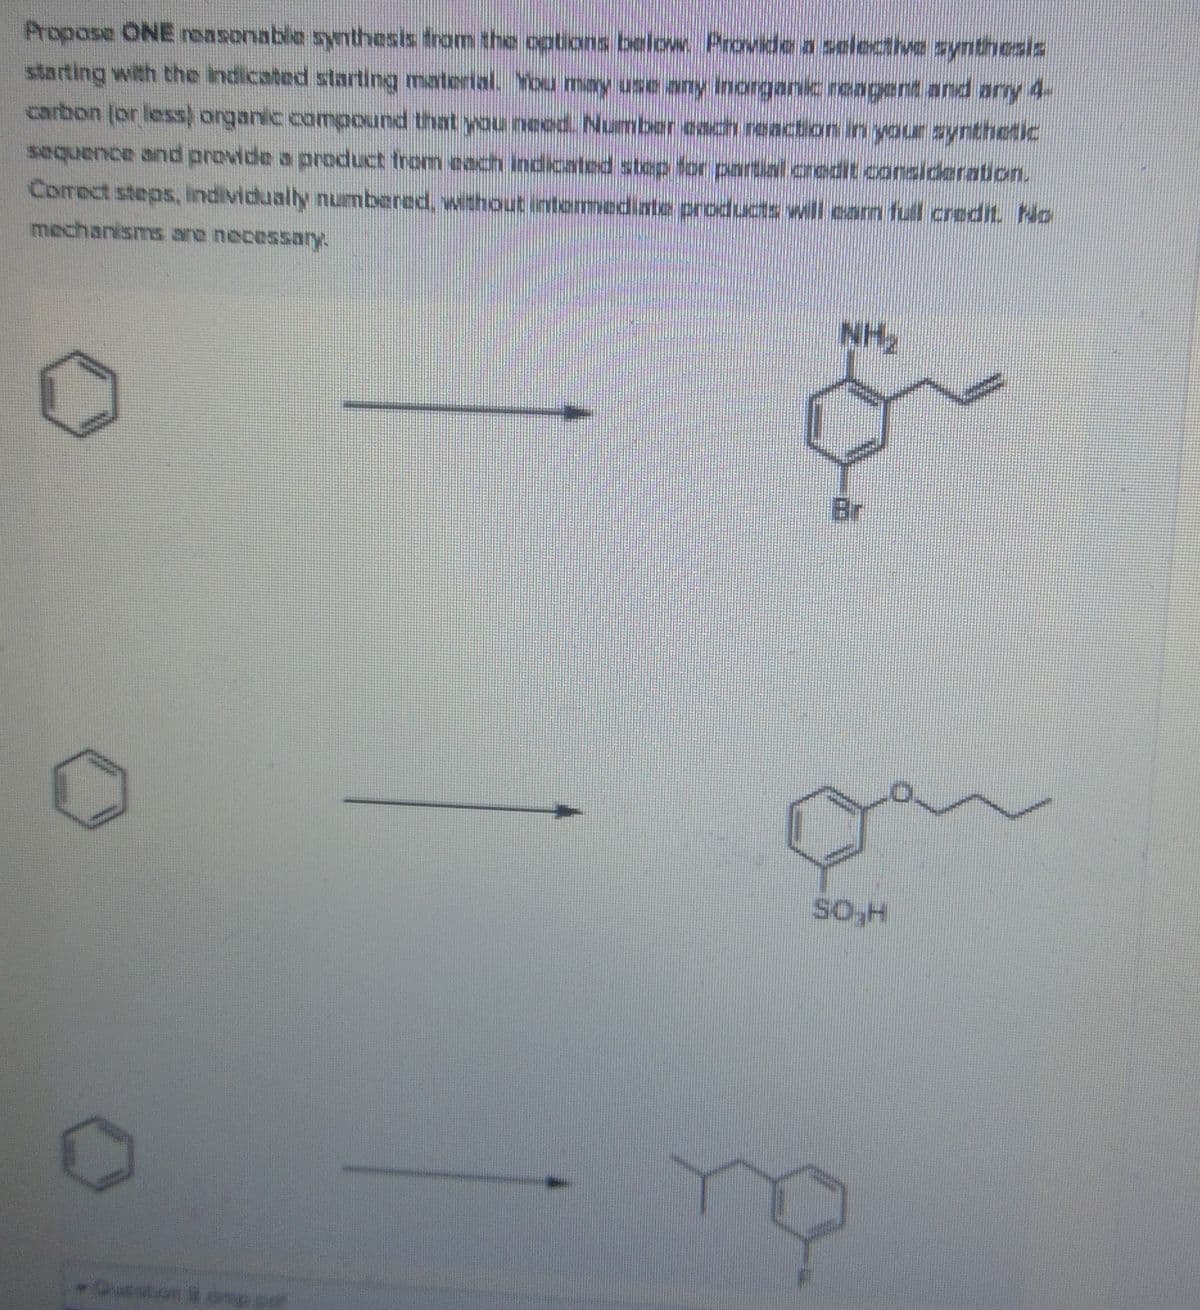 Propose ONE reasonable sythesis from the options below Provide a selective synthesis
starting with the indicated starting material. You may use any Inorganic reagent and ary 4-
carbon (or less) organic compound that you need. Number each reaction in your syntheic
sequence and provide a product from each indicated step for partial credit consideration.
Correct steps, lindividually numbered, without lintermediate products wil eam full credit. No
NH2
Br
So-H
